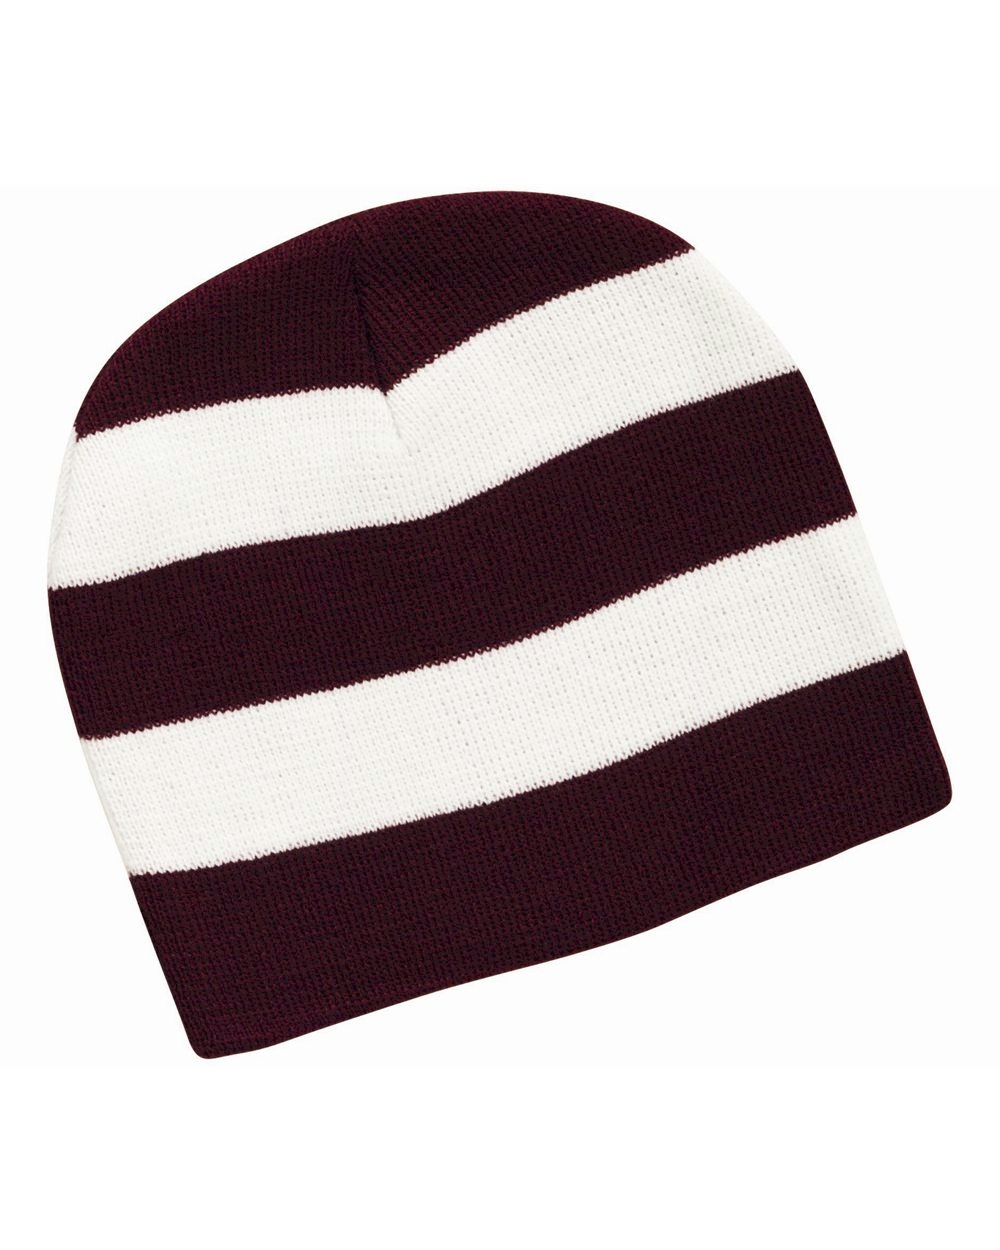 Rugby Striped Knit Beanie Embroidery Blanks - Maroon/White